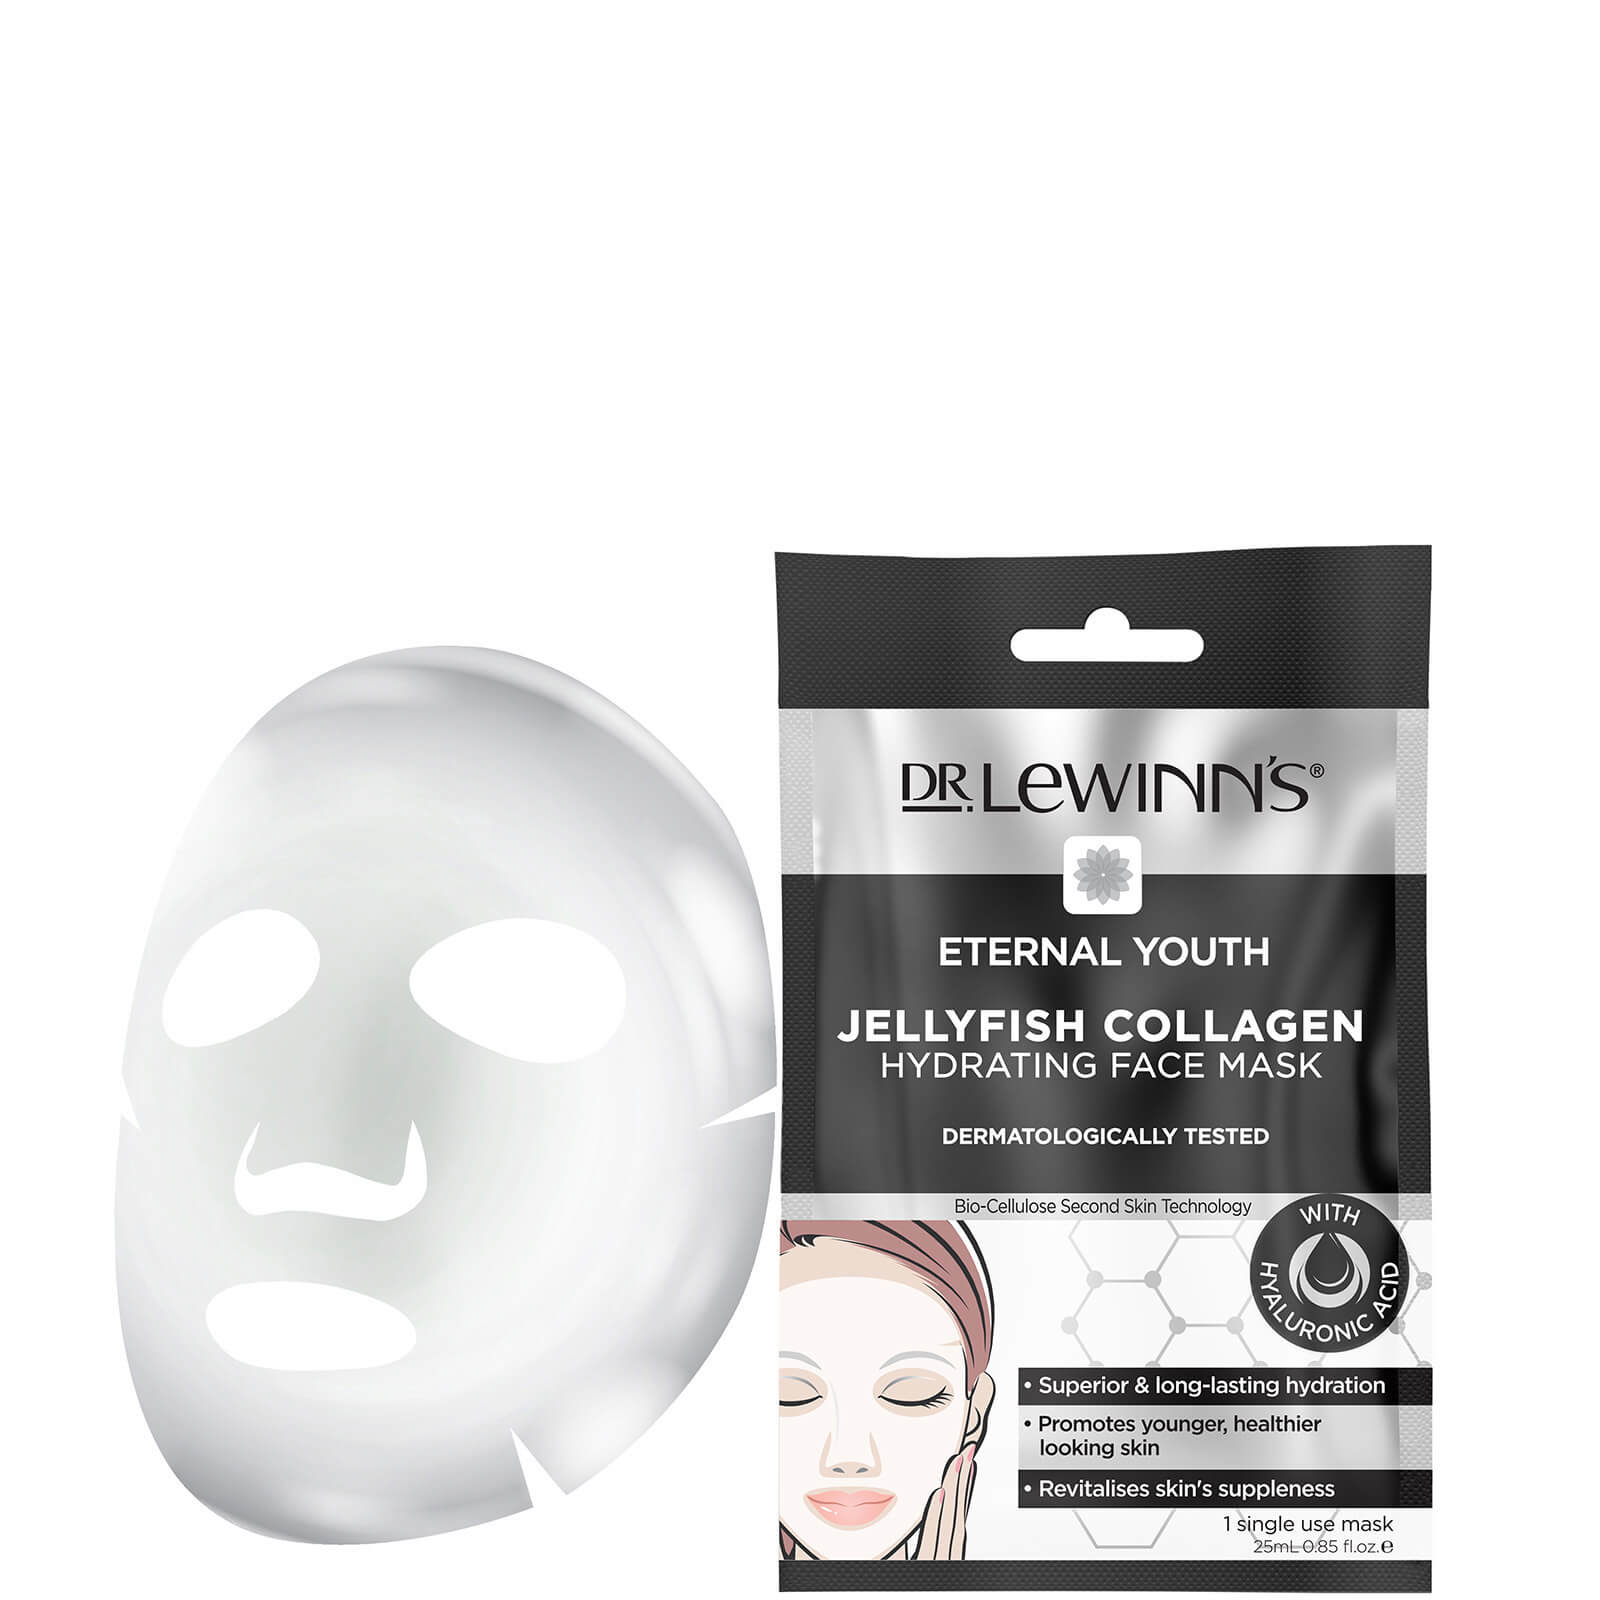 Dr. LeWinn's Eternal Youth Jellyfish Collagen Hydrating Face Mask